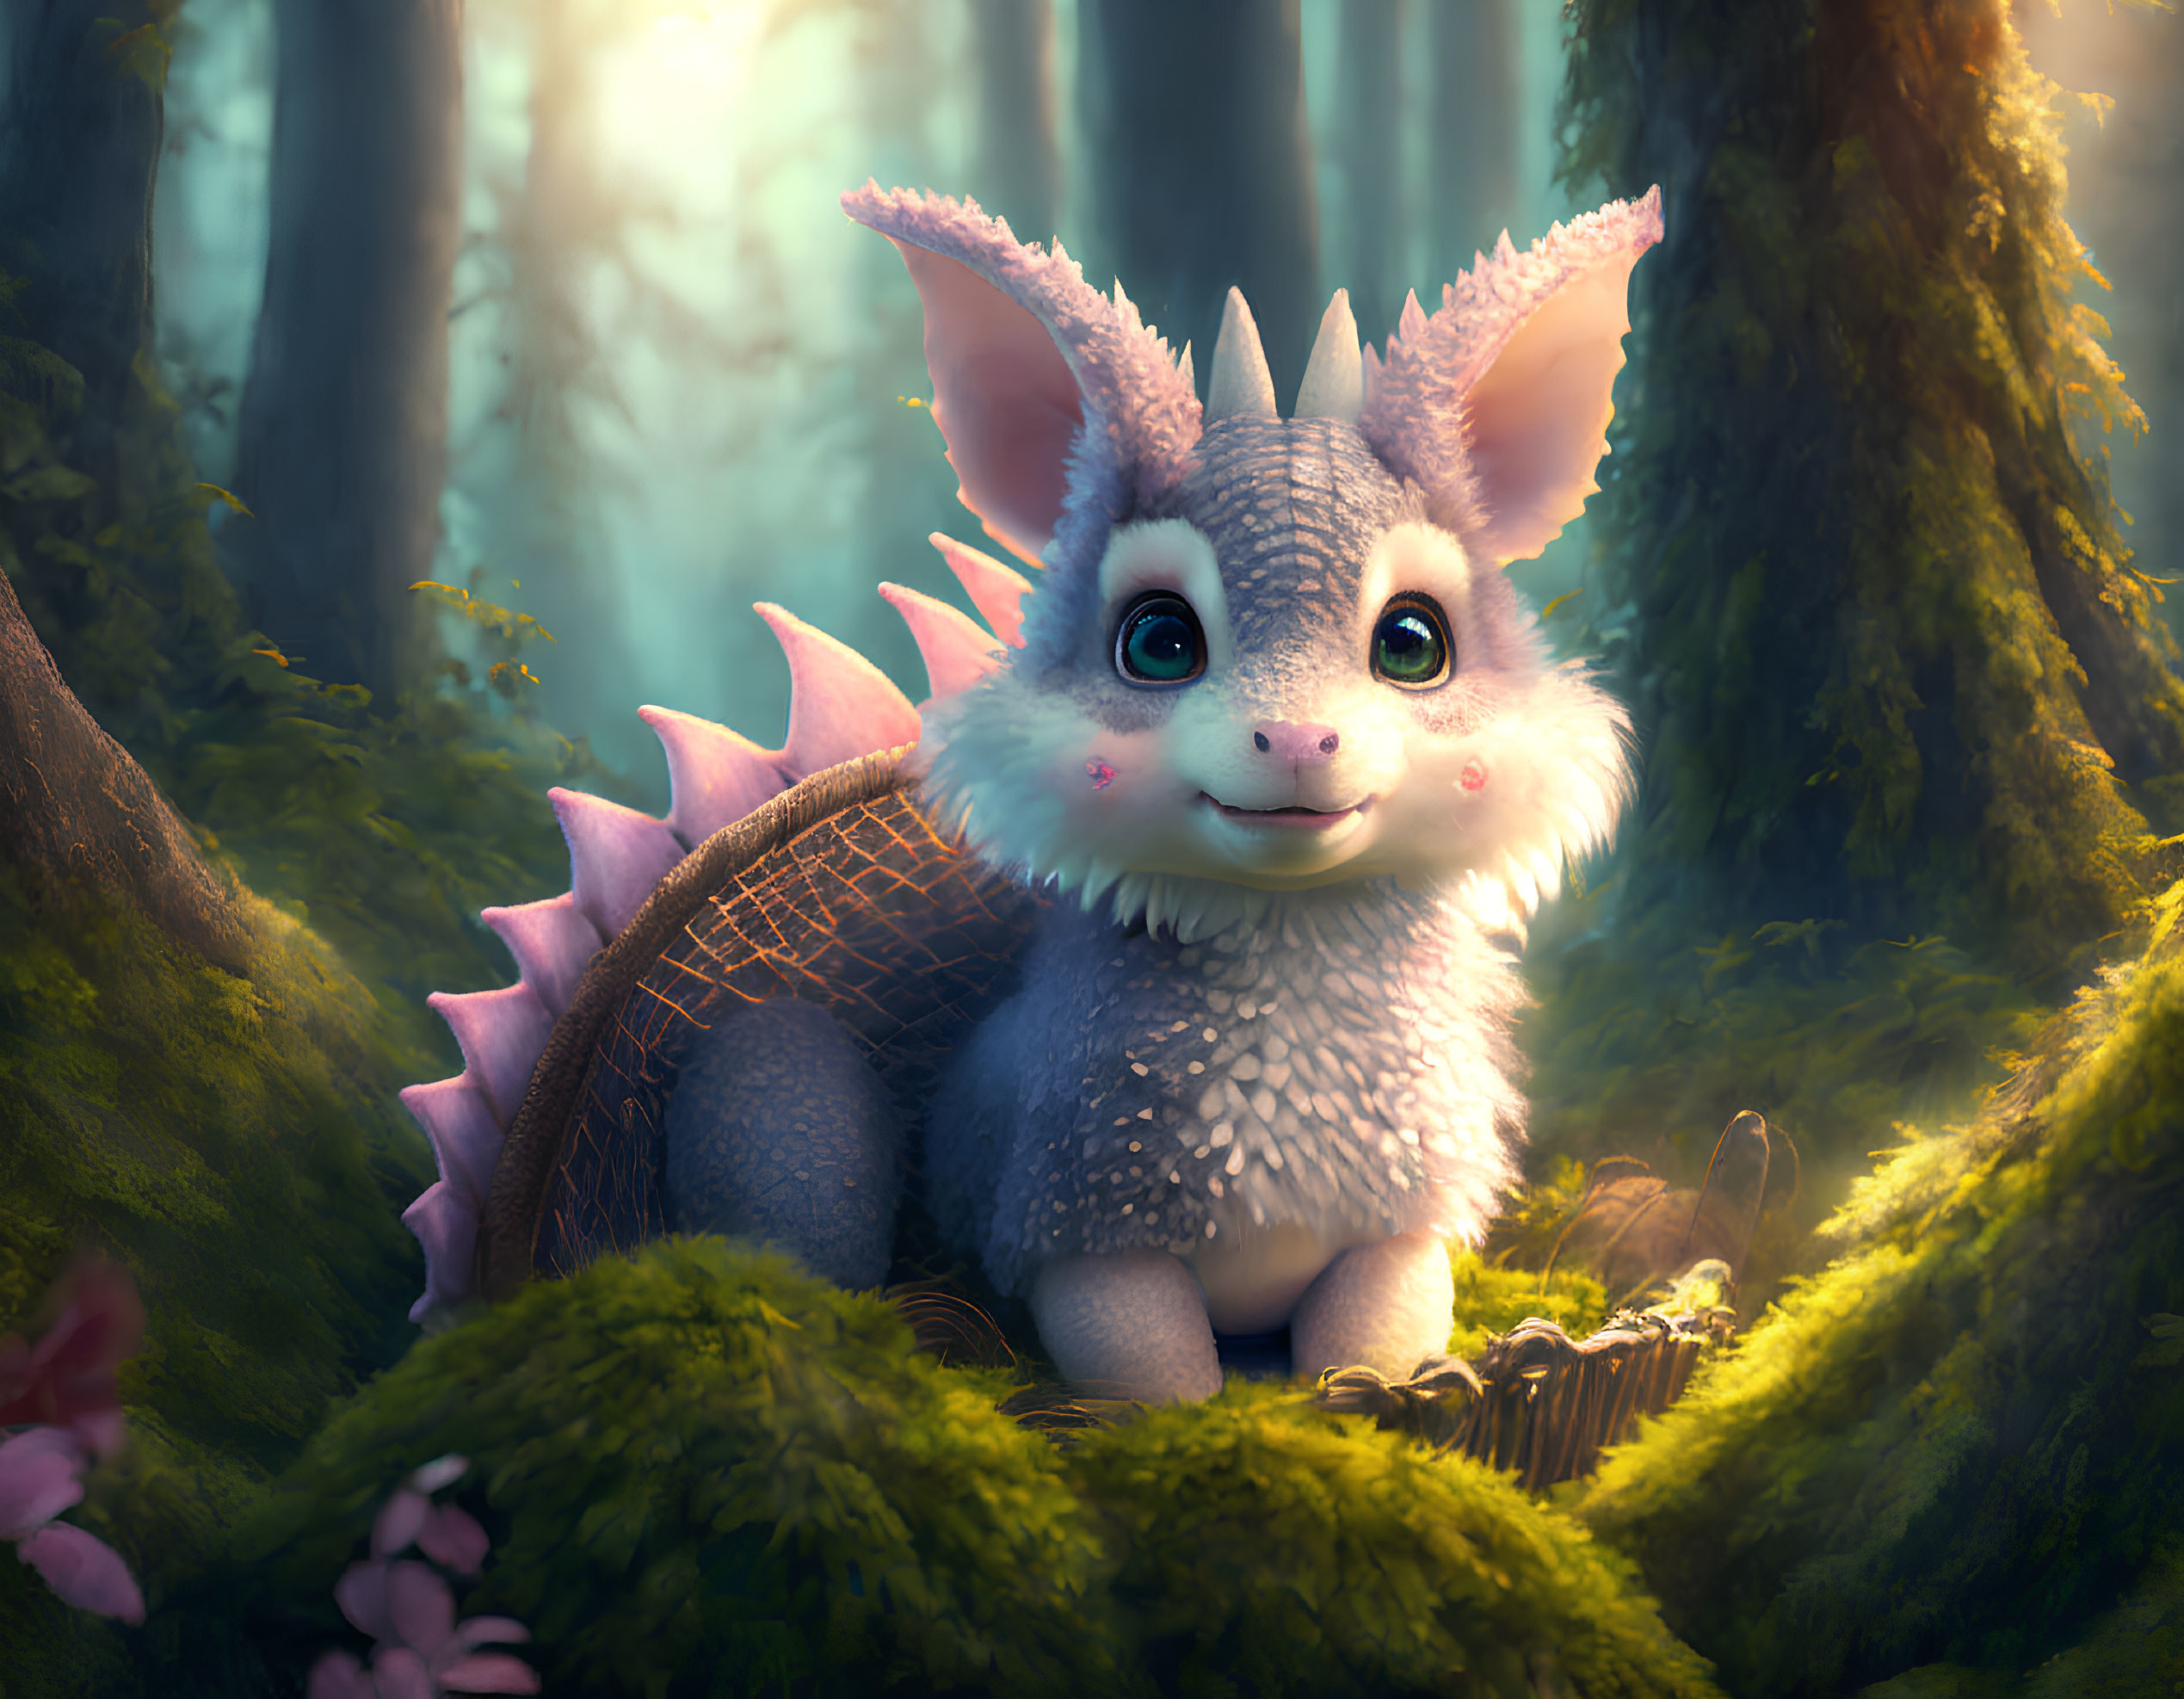 Cartoon-style dragon in enchanted forest with soft light